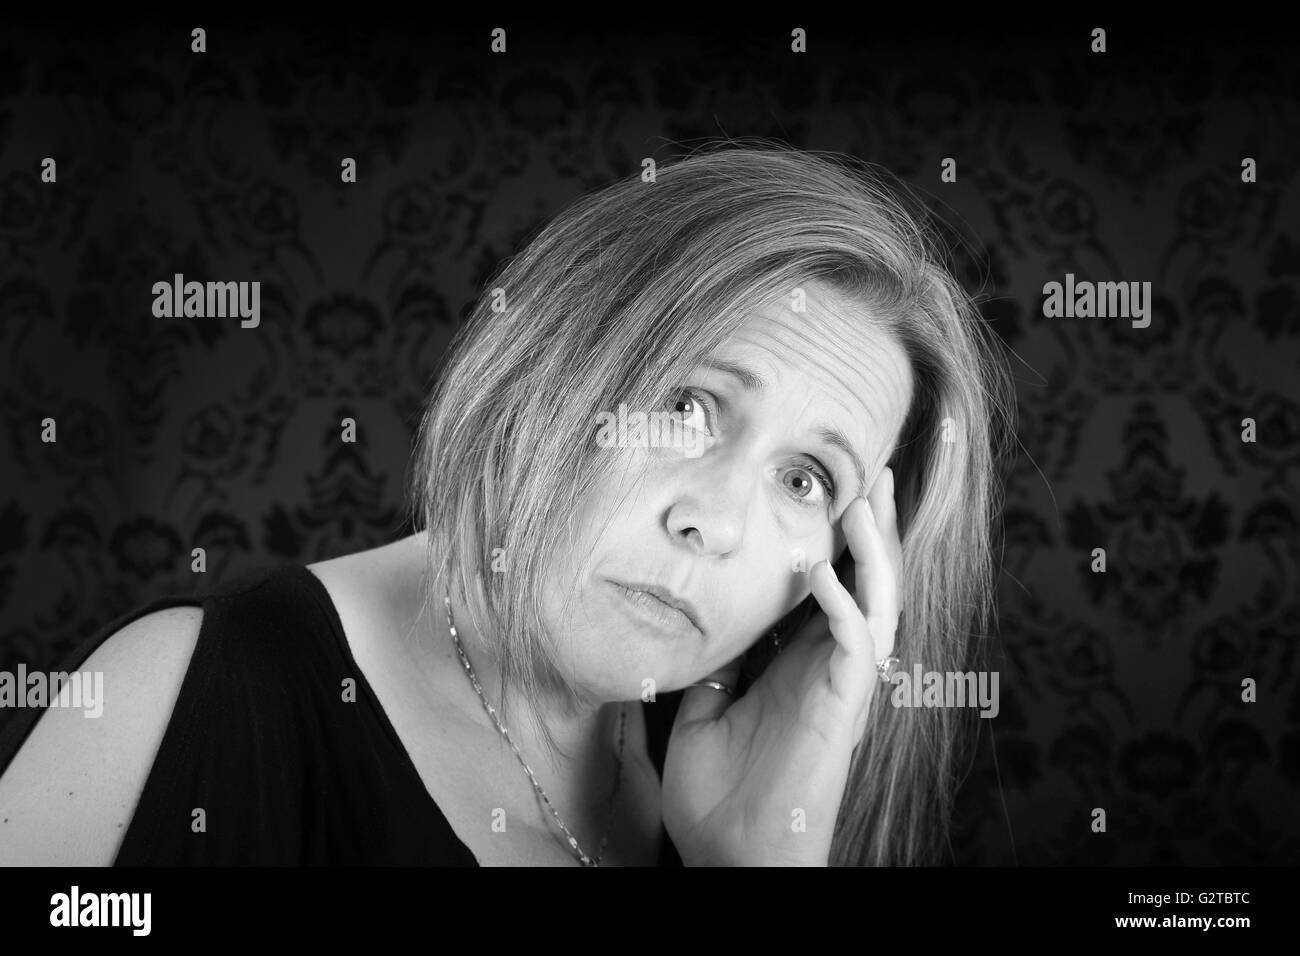 Black and white of woman looking sad on black damask Stock Photo